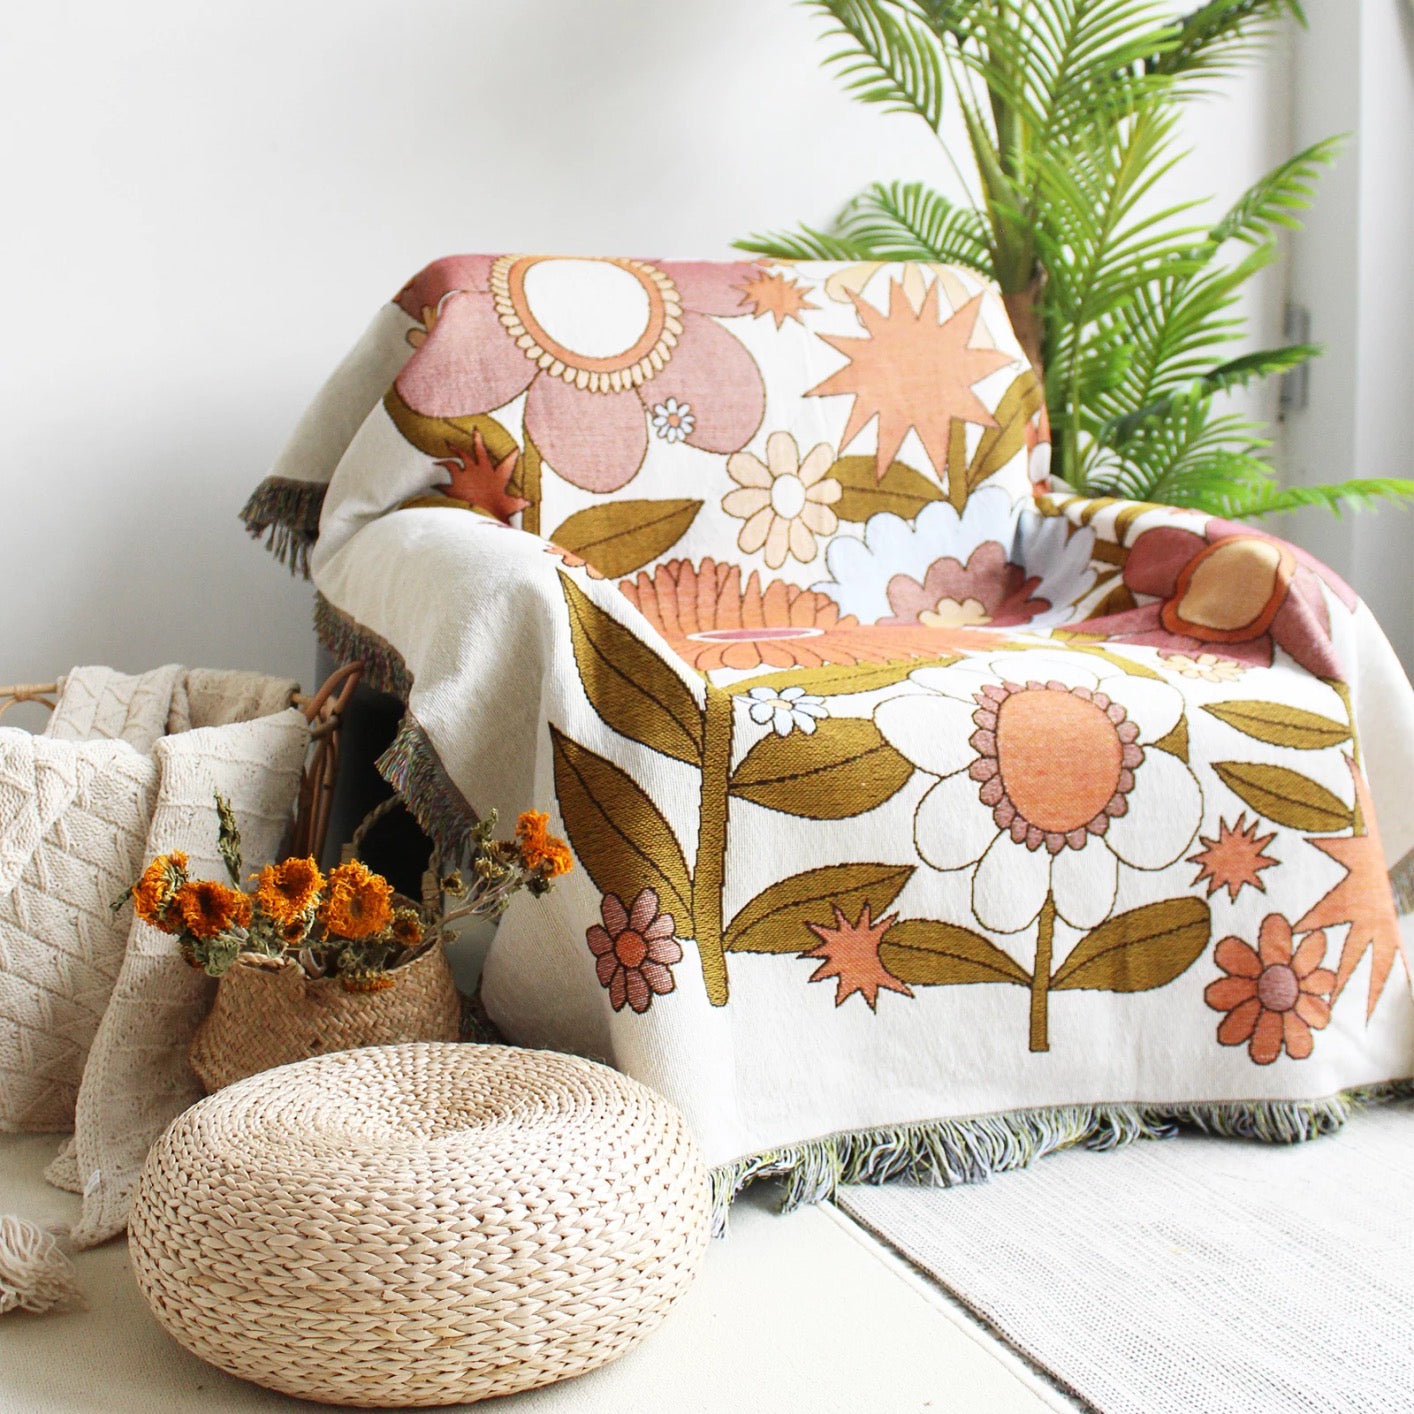 Good Karma Floral Boho throw nz, orange and brown Floral pattern Woven Boho Quilt nz Colorful Bohemian Tapestries with tassels on white background on the chair